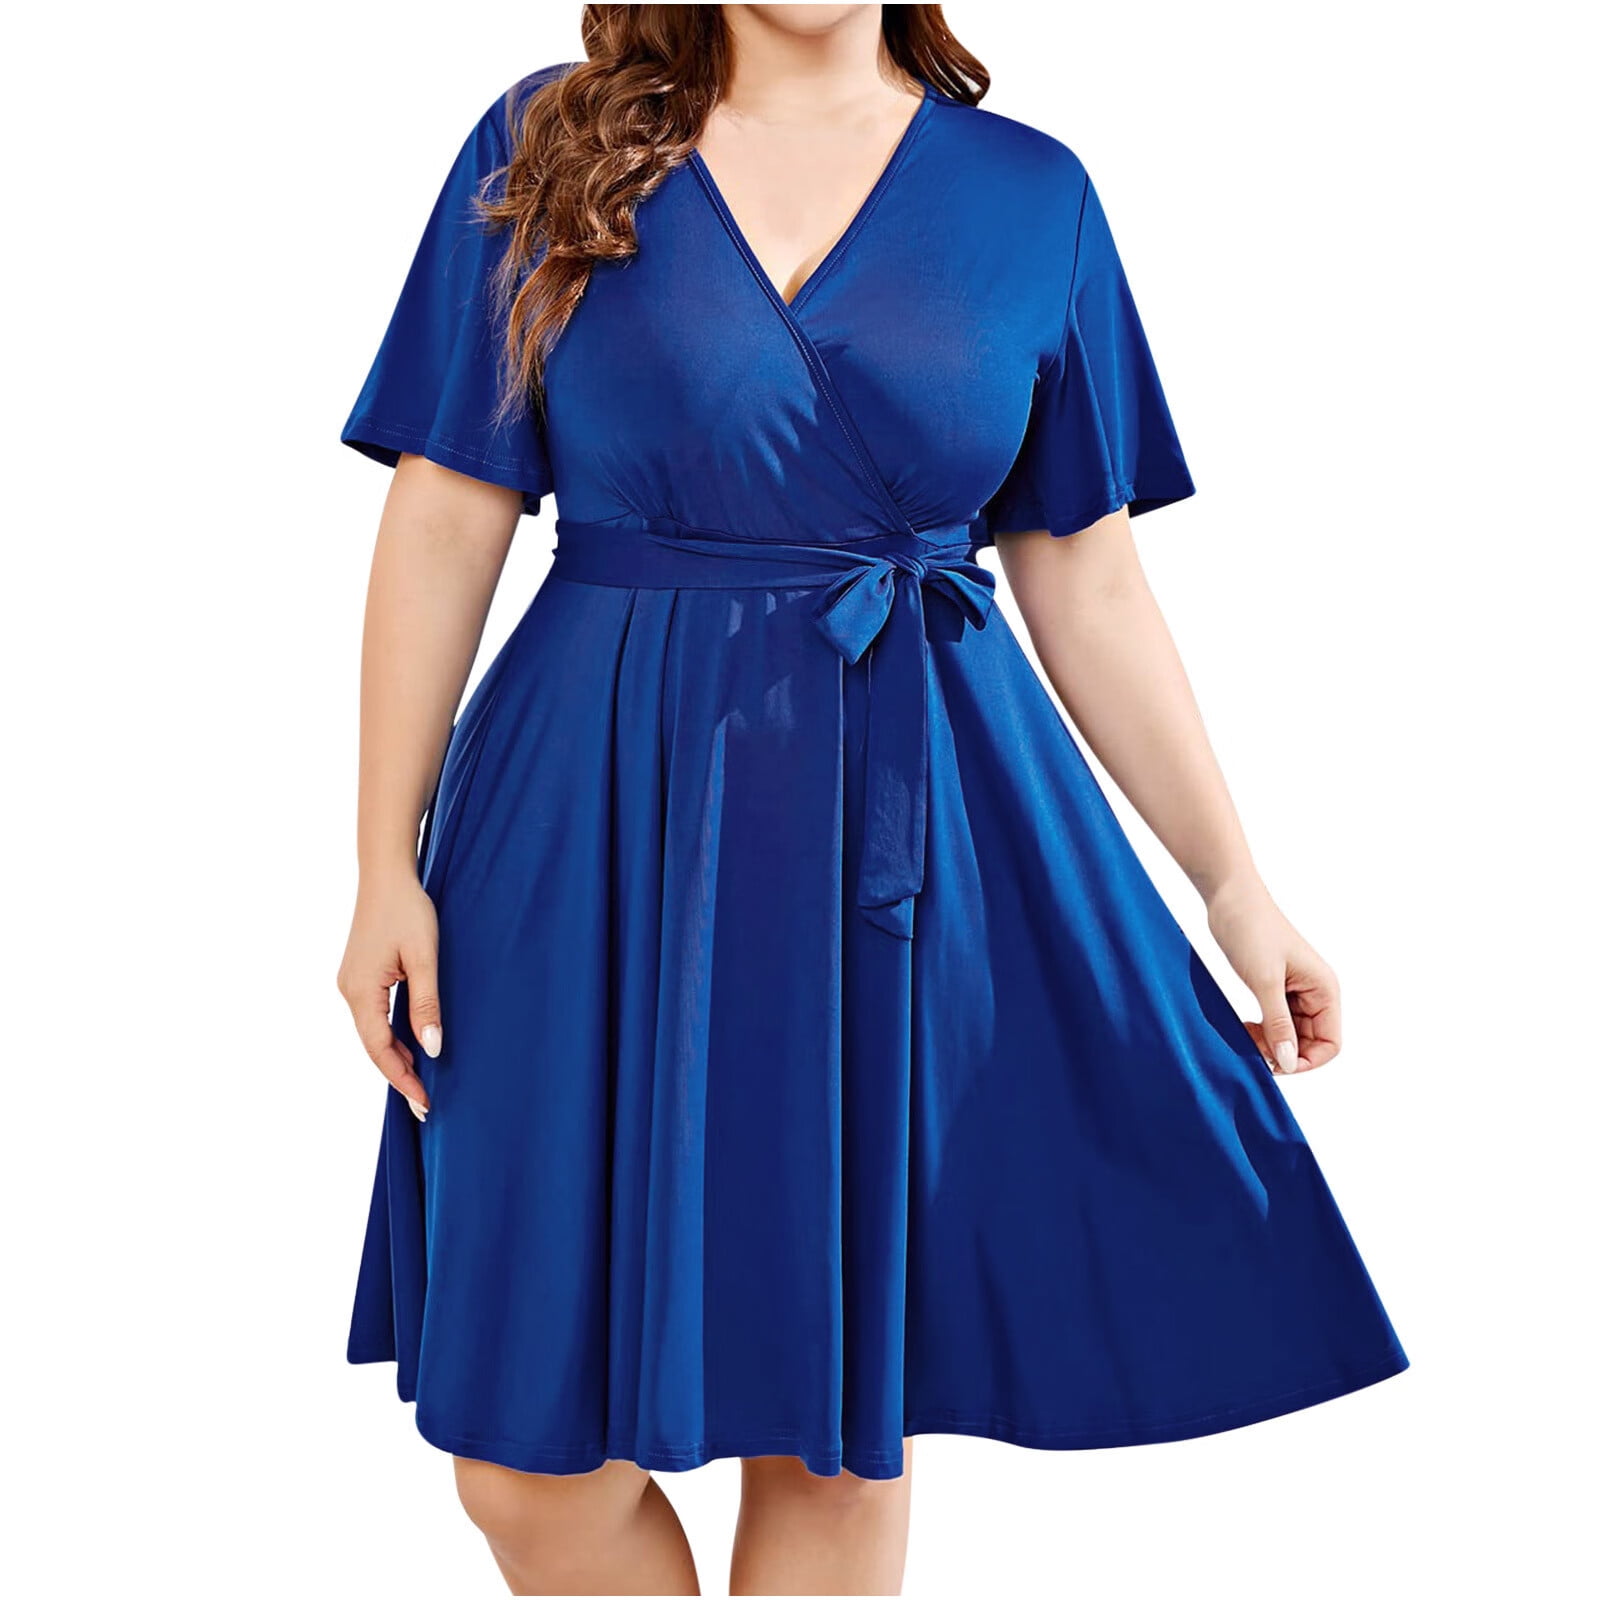 Womens Plus Size Casual Short Sleeve Swing Dresses Sexy Deep V